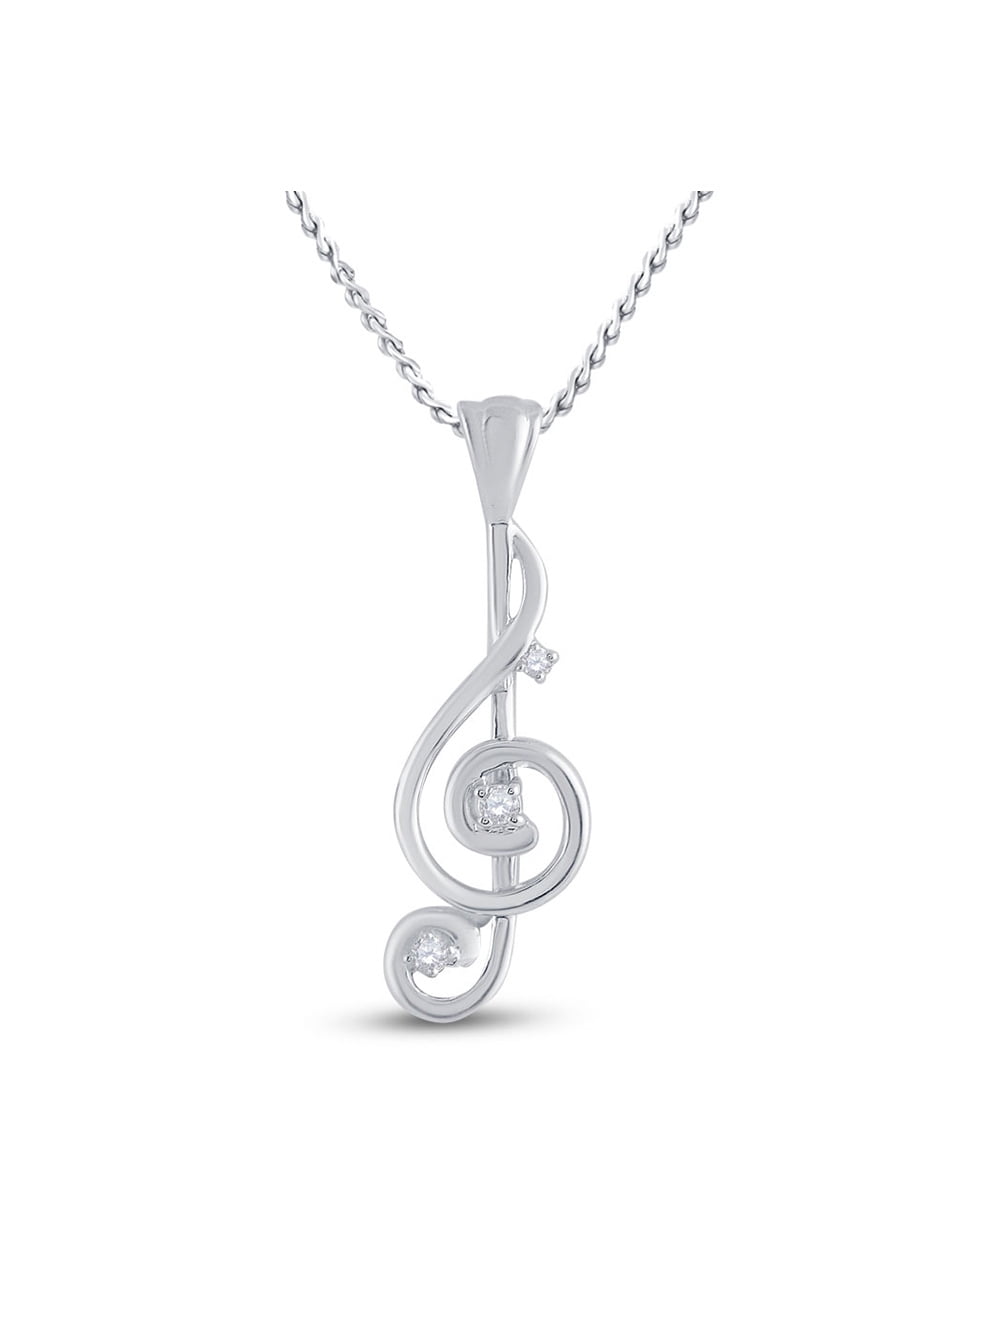 Details about   New Real Solid 14K Gold Treble Clef Music Note Charm Pendant 